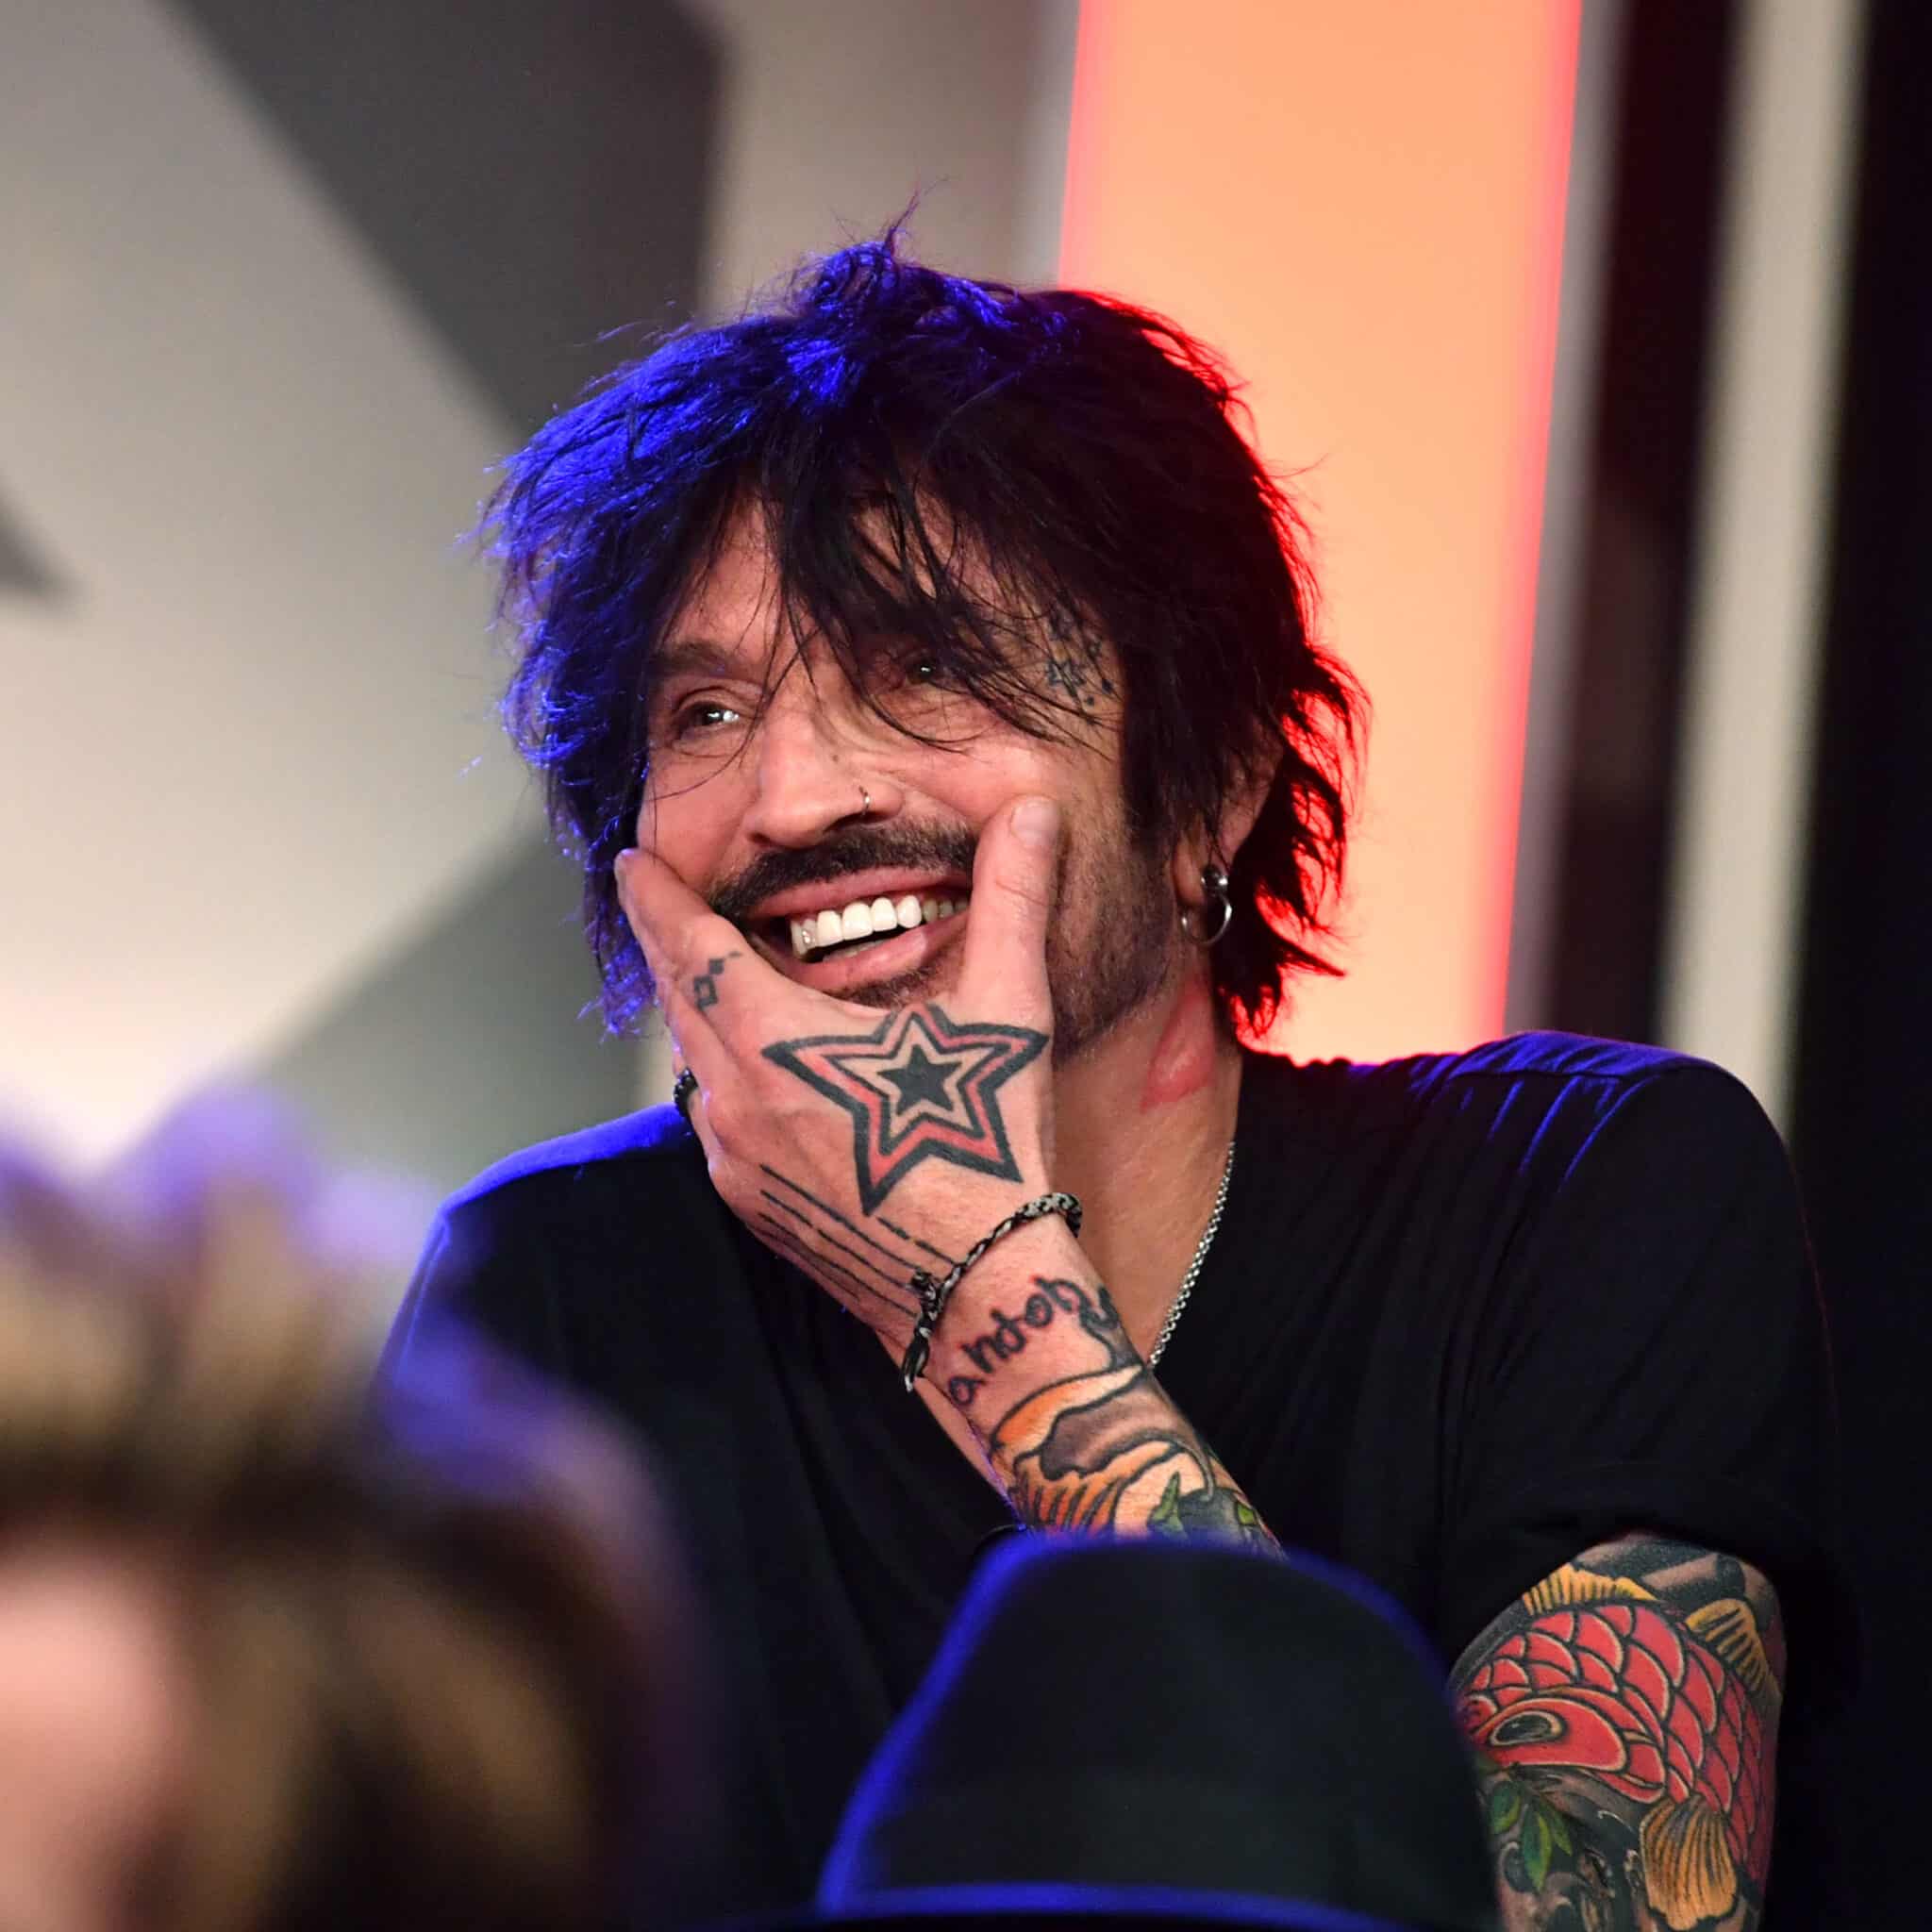 Instagram slammed for letting Tommy Lee nude remain for hours